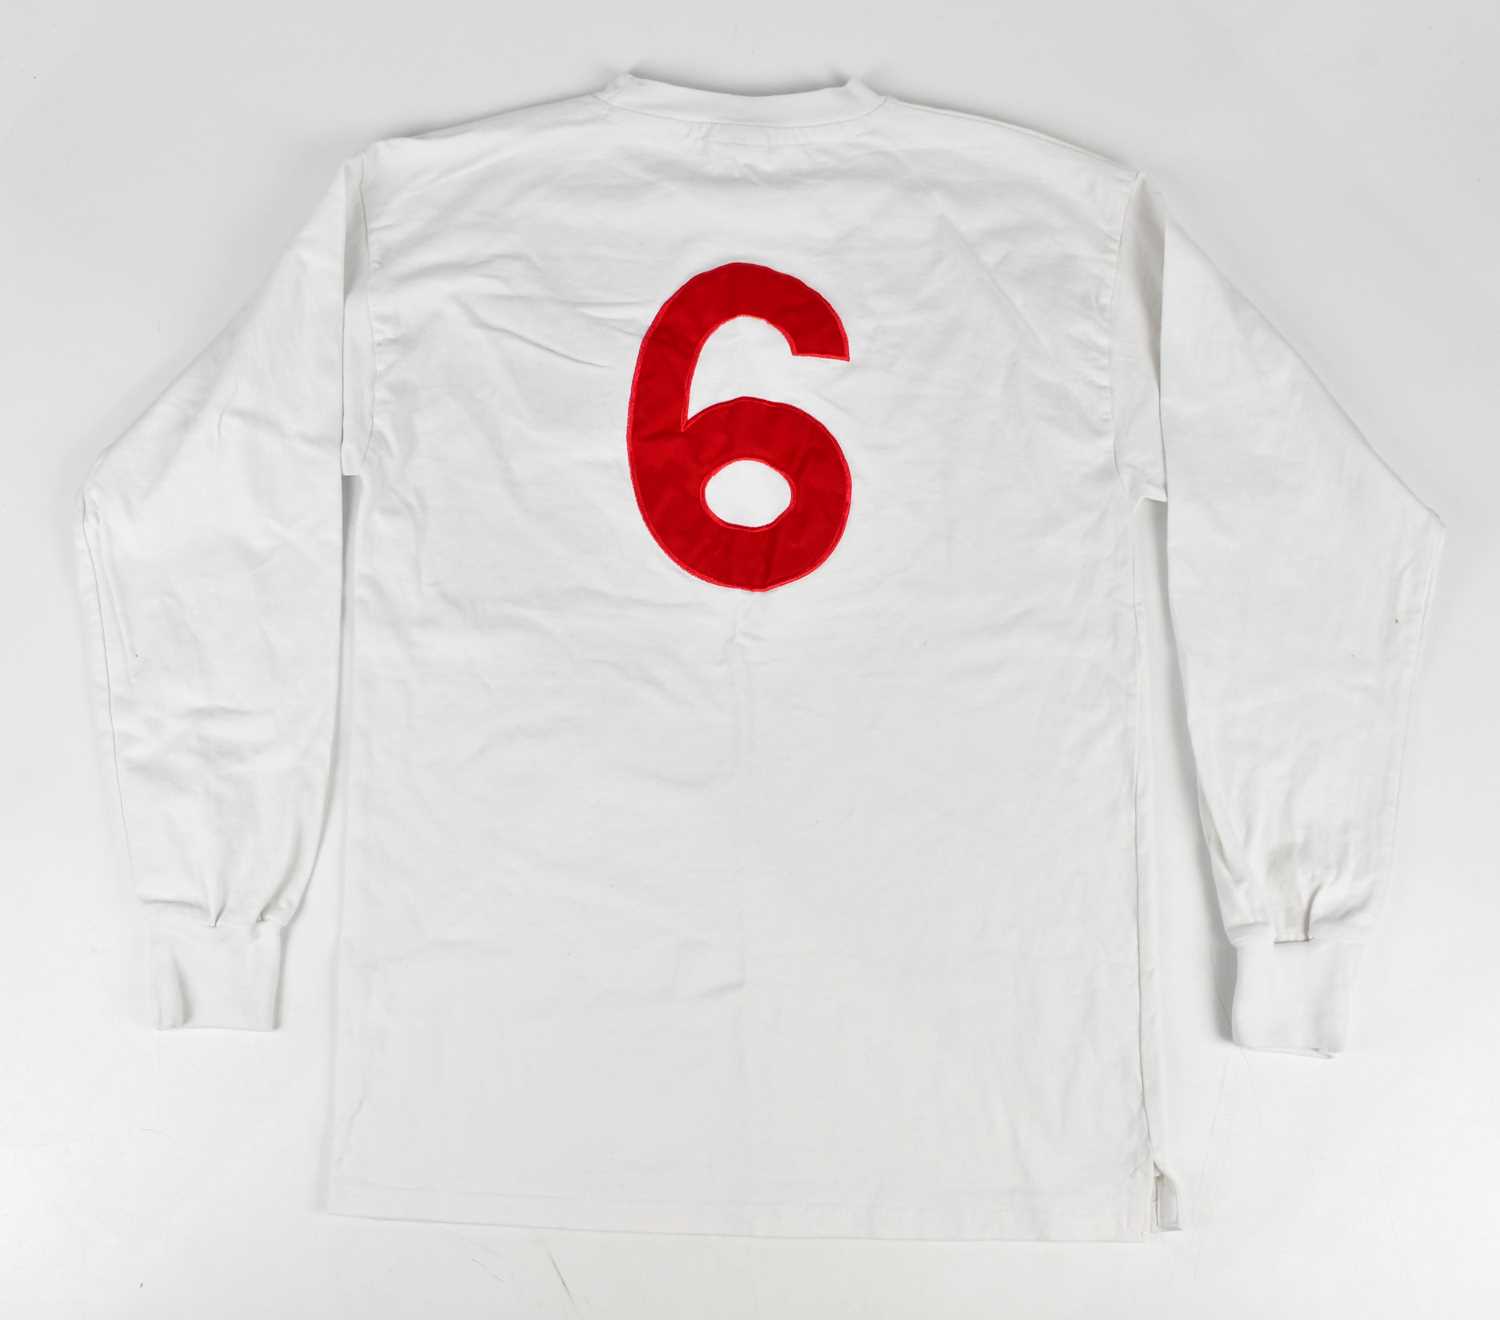 ENGLAND; a Top Scorers retro style football shirt, signed to the front Greaves, Kane, Owen, - Image 3 of 3